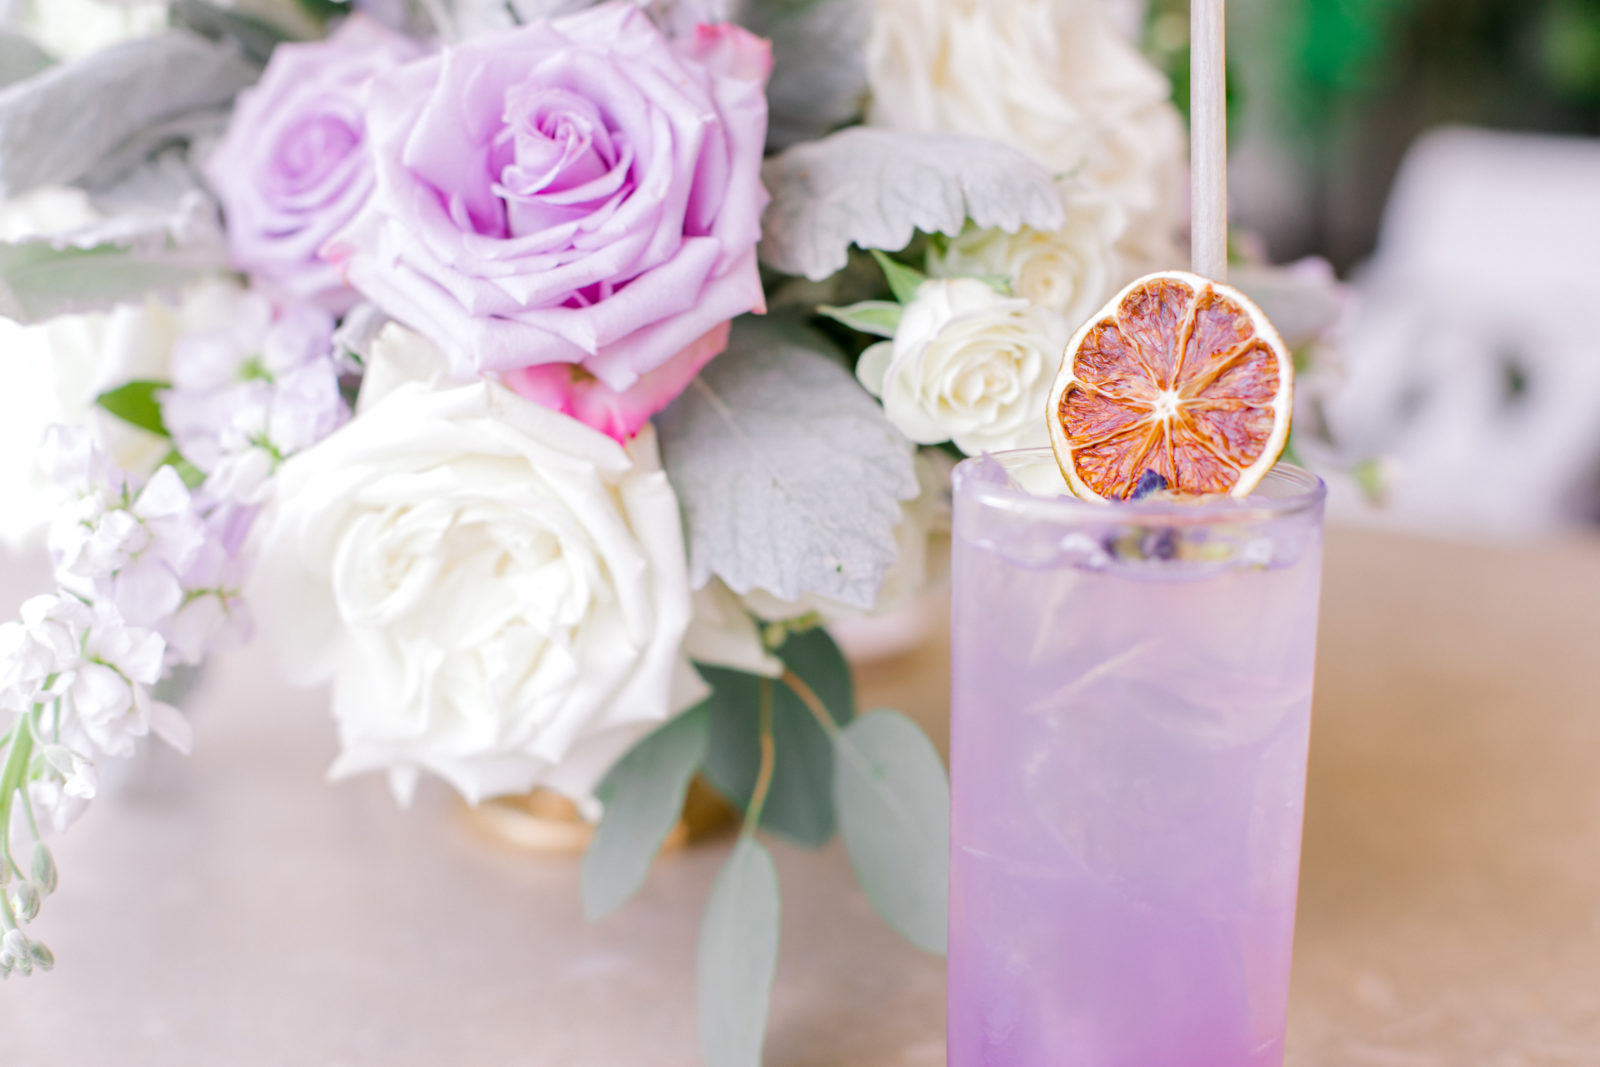 Game Day Blitz | The Perfect Purple Game Day Cocktail #gameday #perfect #cocktail #purple #refreshing #Texas #Christian #University #spirited Game Day Blitz Cocktail